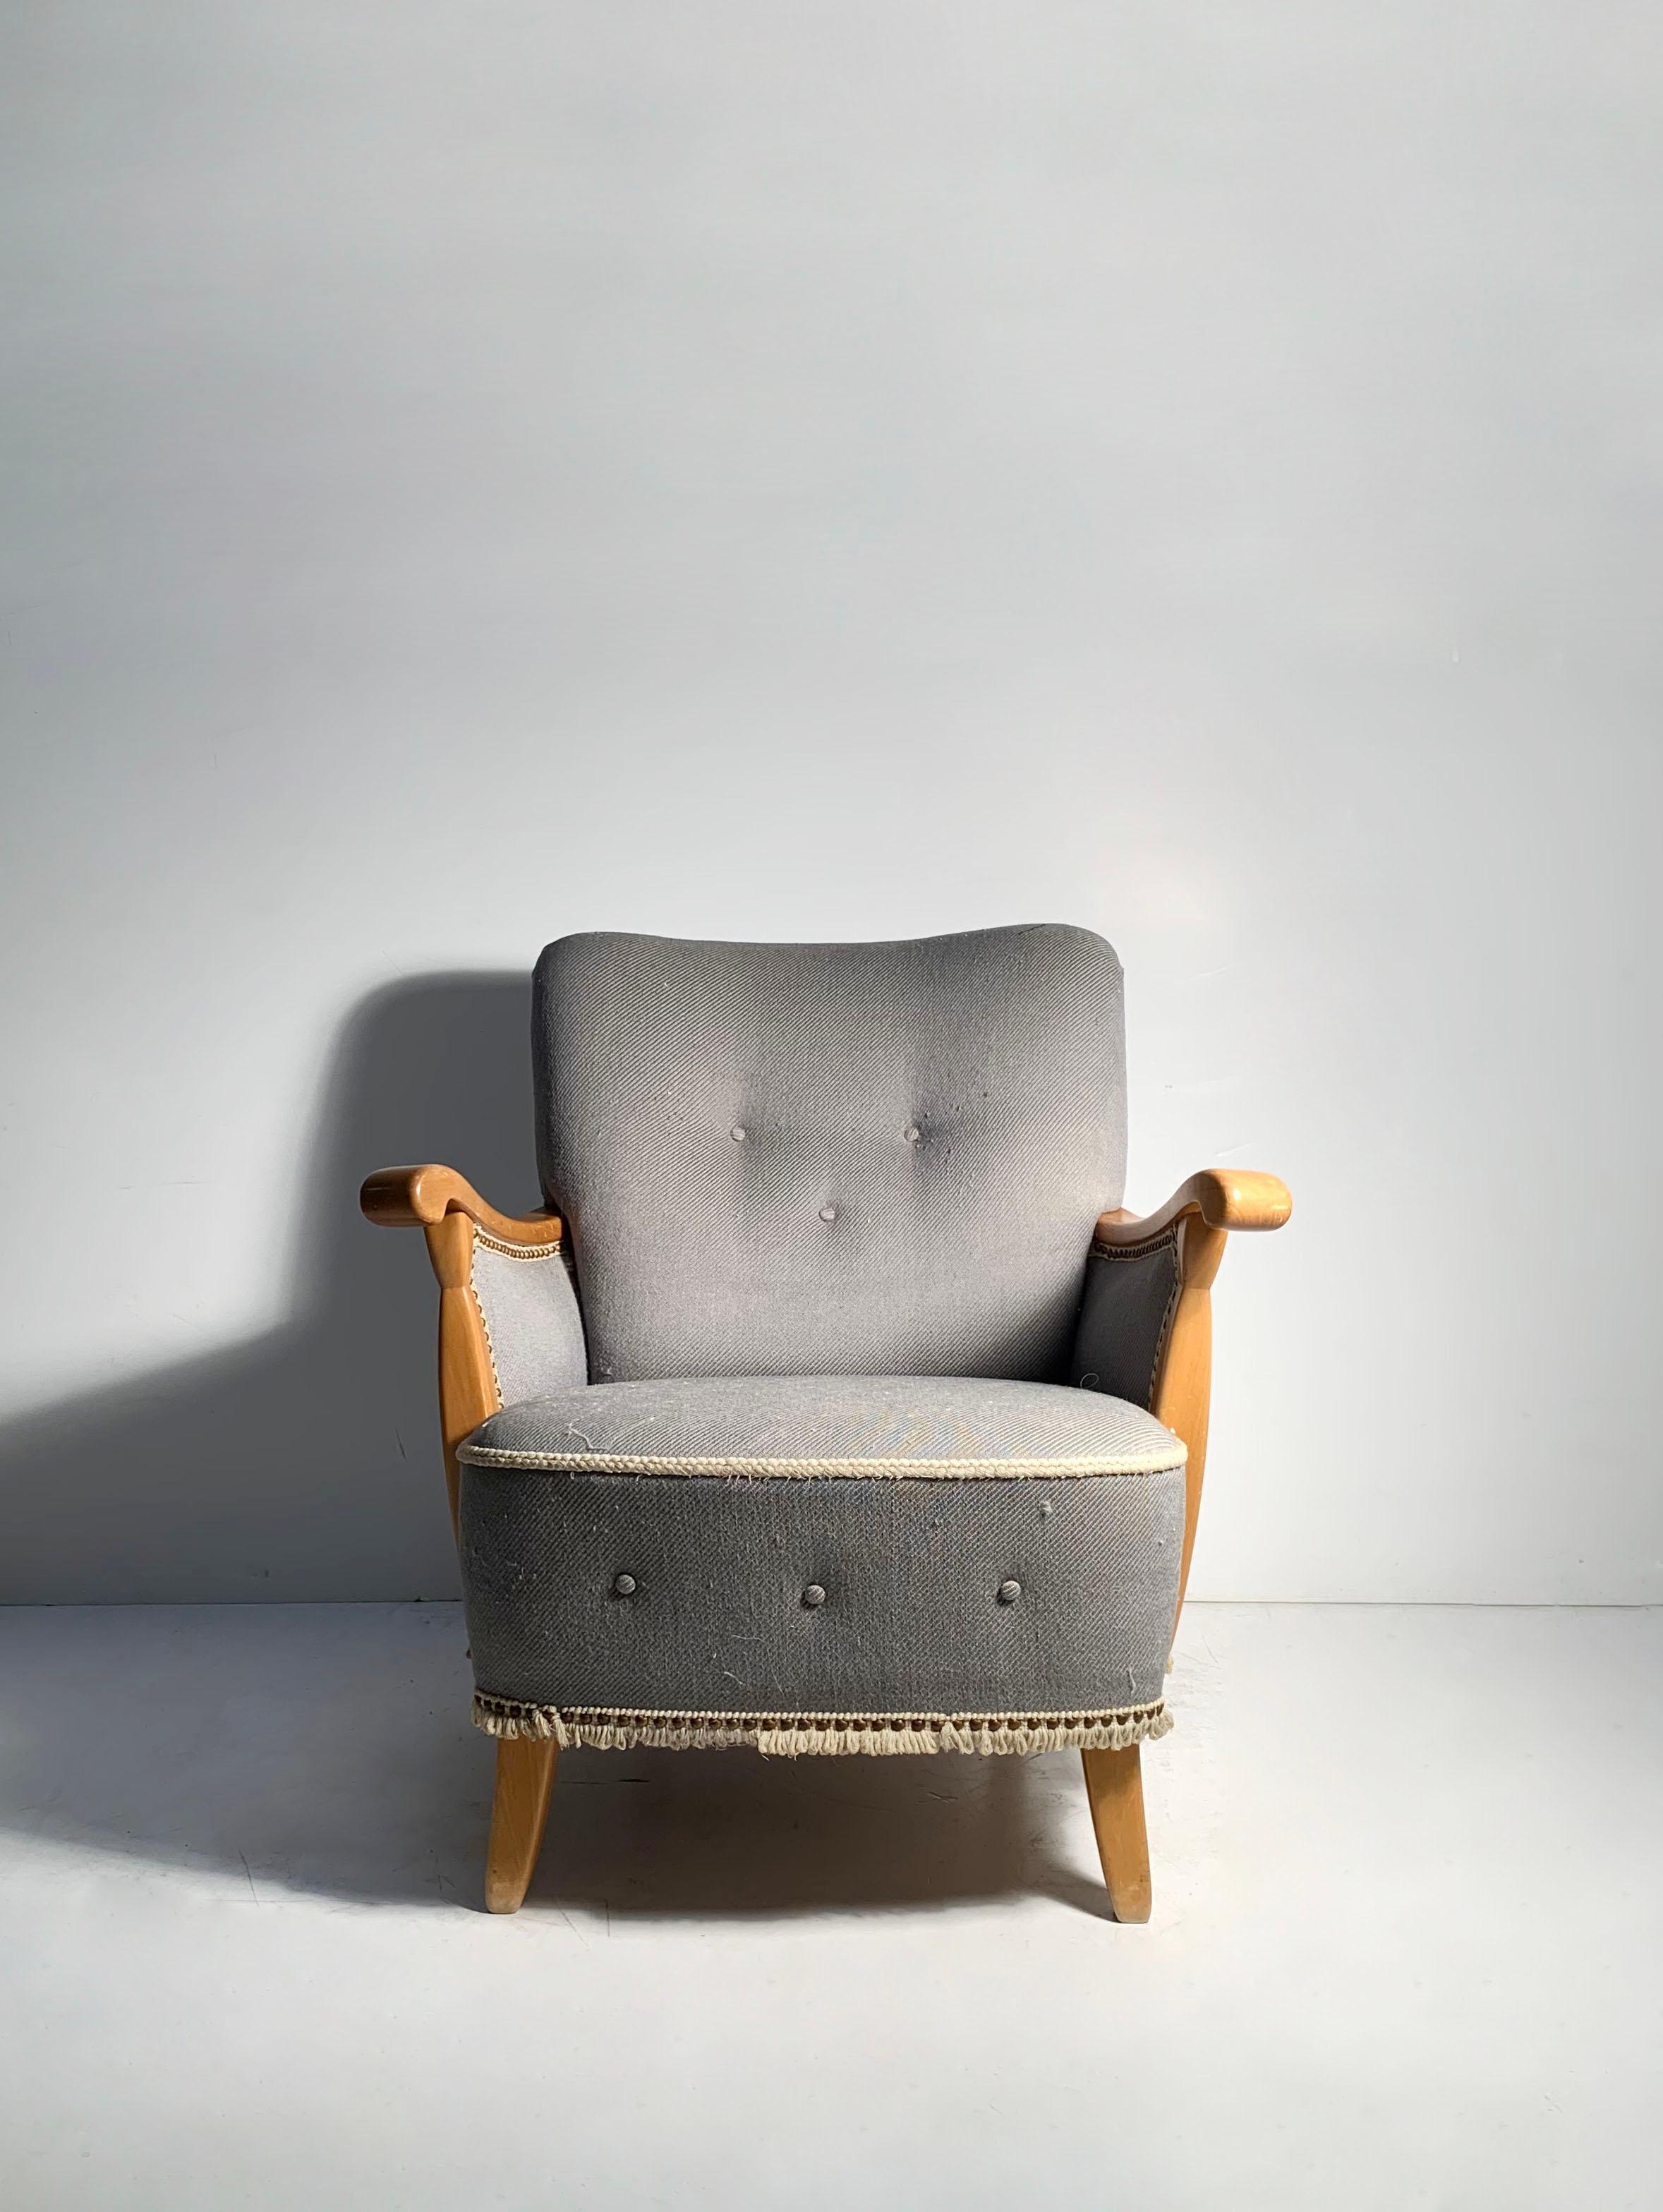 Vintage 1940s Swedish Lounge Chair. Very well crafted. Possibly by Axel Larsson or Carl Malmsten.

Appears to be the original upholstery from the midcentury.